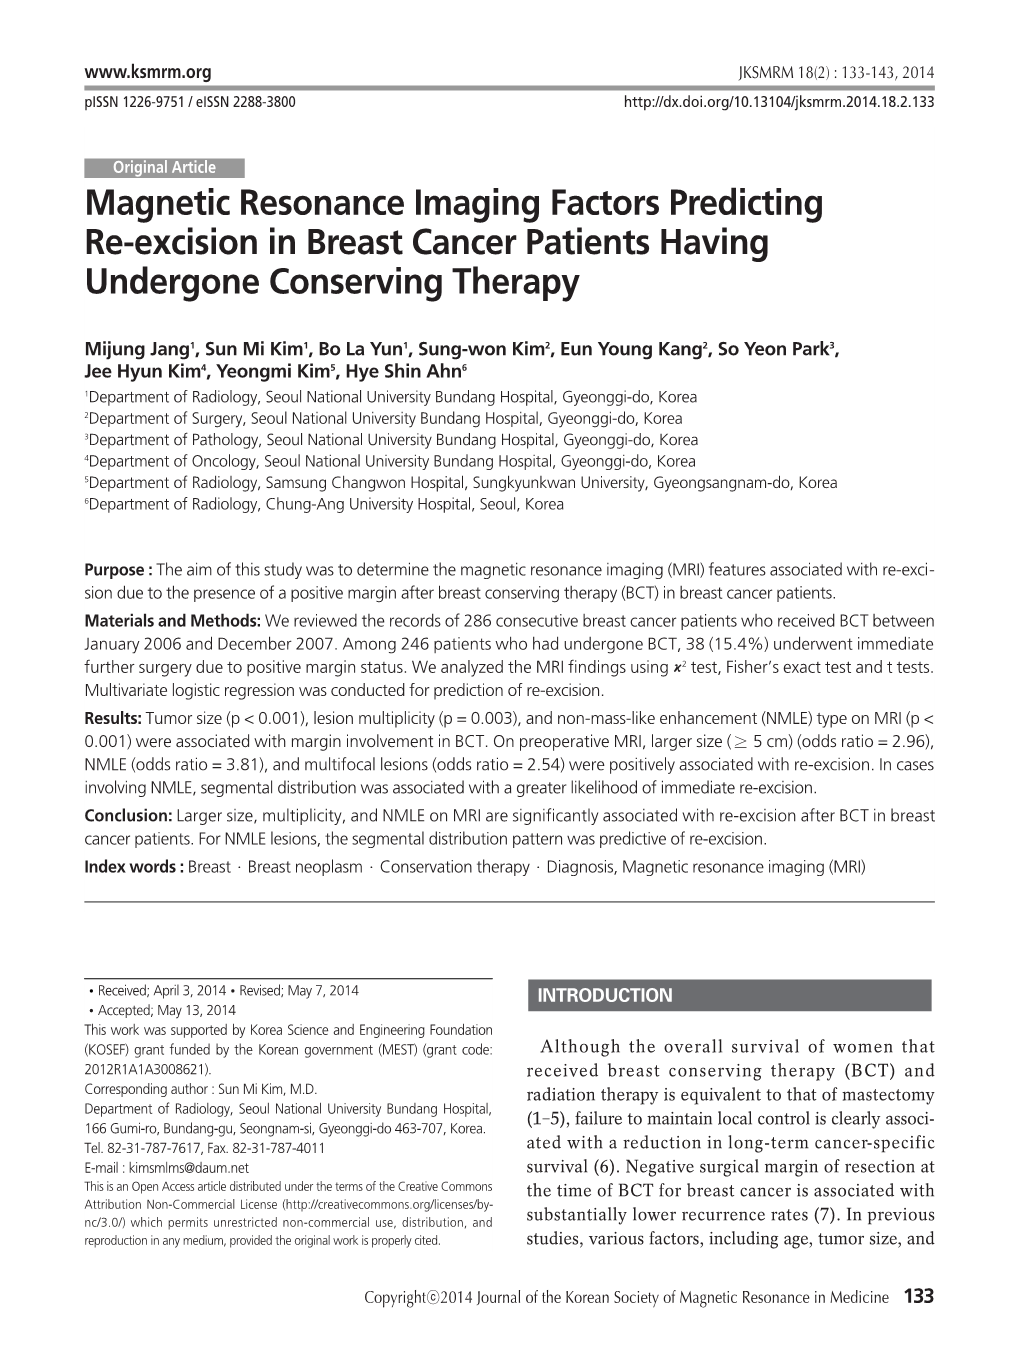 Magnetic Resonance Imaging Factors Predicting Re-Excision in Breast Cancer Patients Having Undergone Conserving Therapy